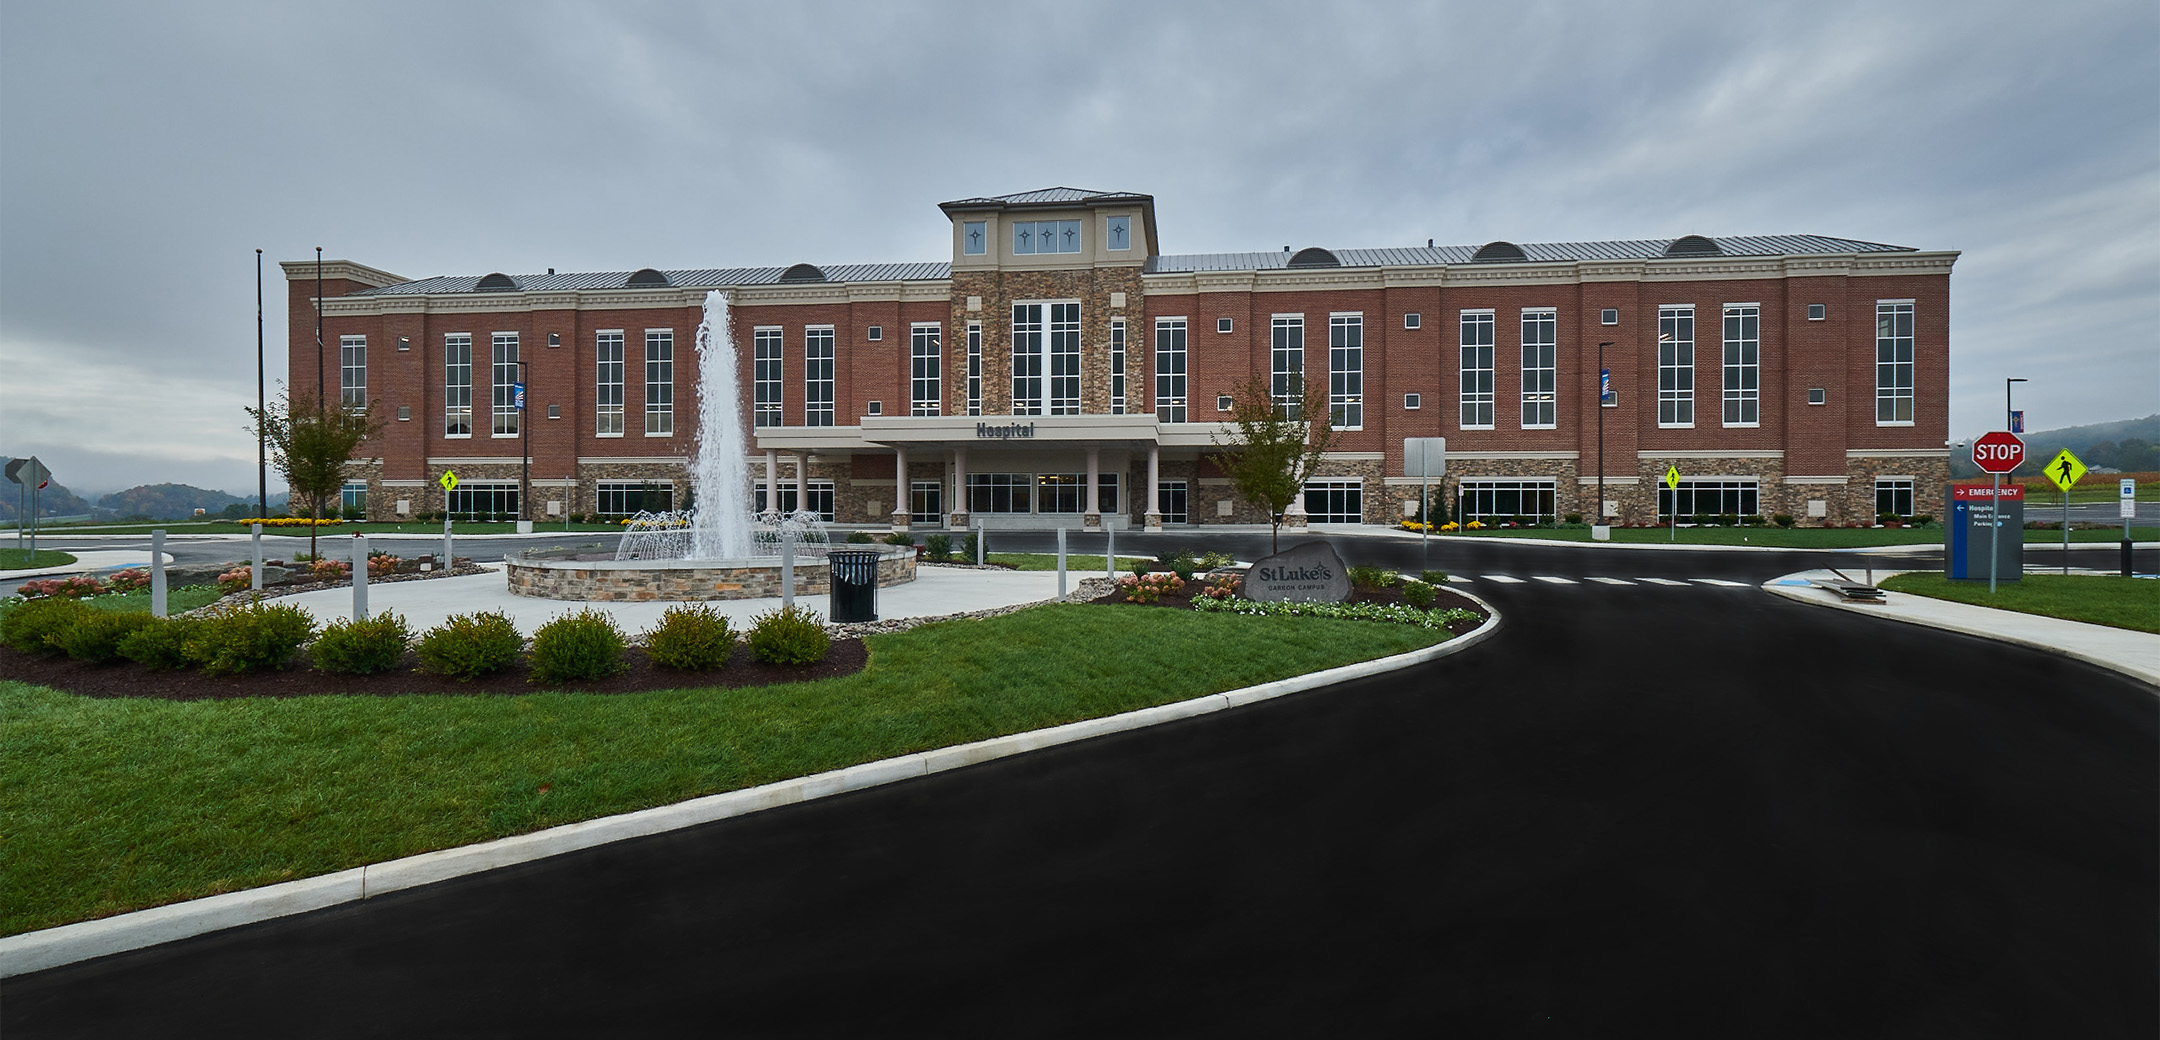 St. Luke' s Carbon County hospital showcasing the 3-story building and both the main, emergency entrances, and the fountain in front.